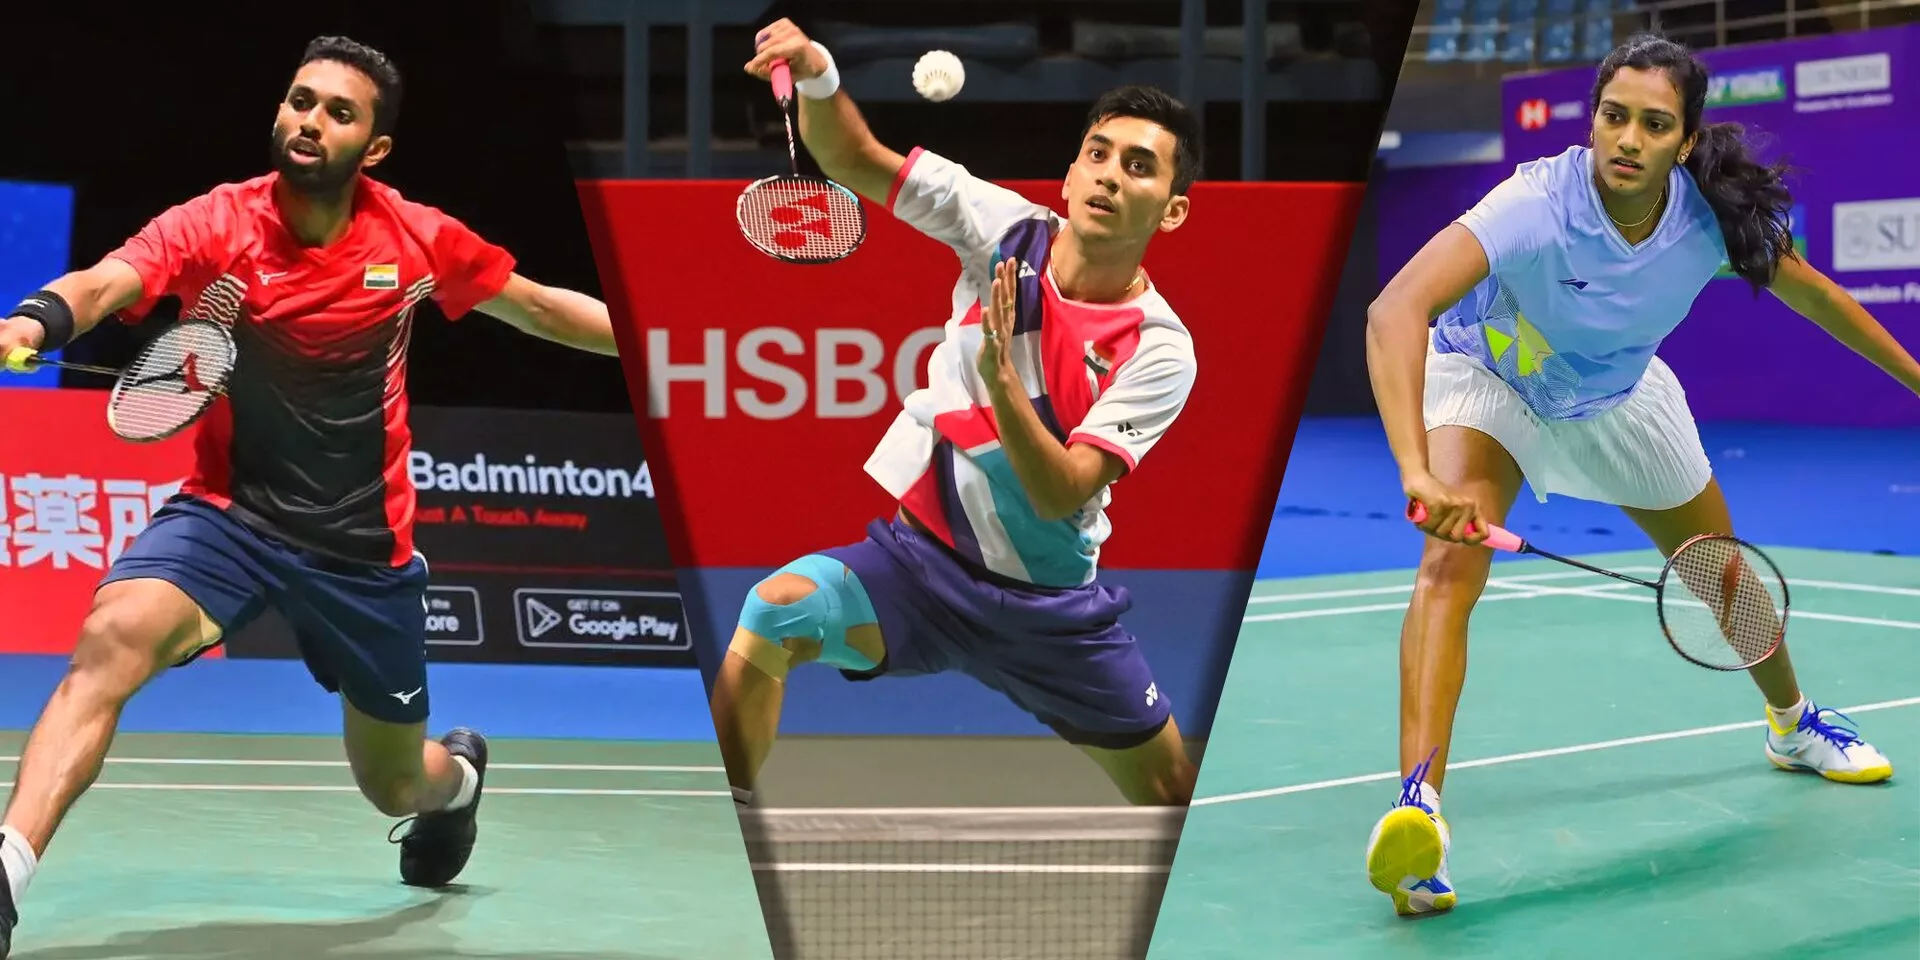 Malaysia Open 2023 Indias full fixtures, schedule, results and live streaming details